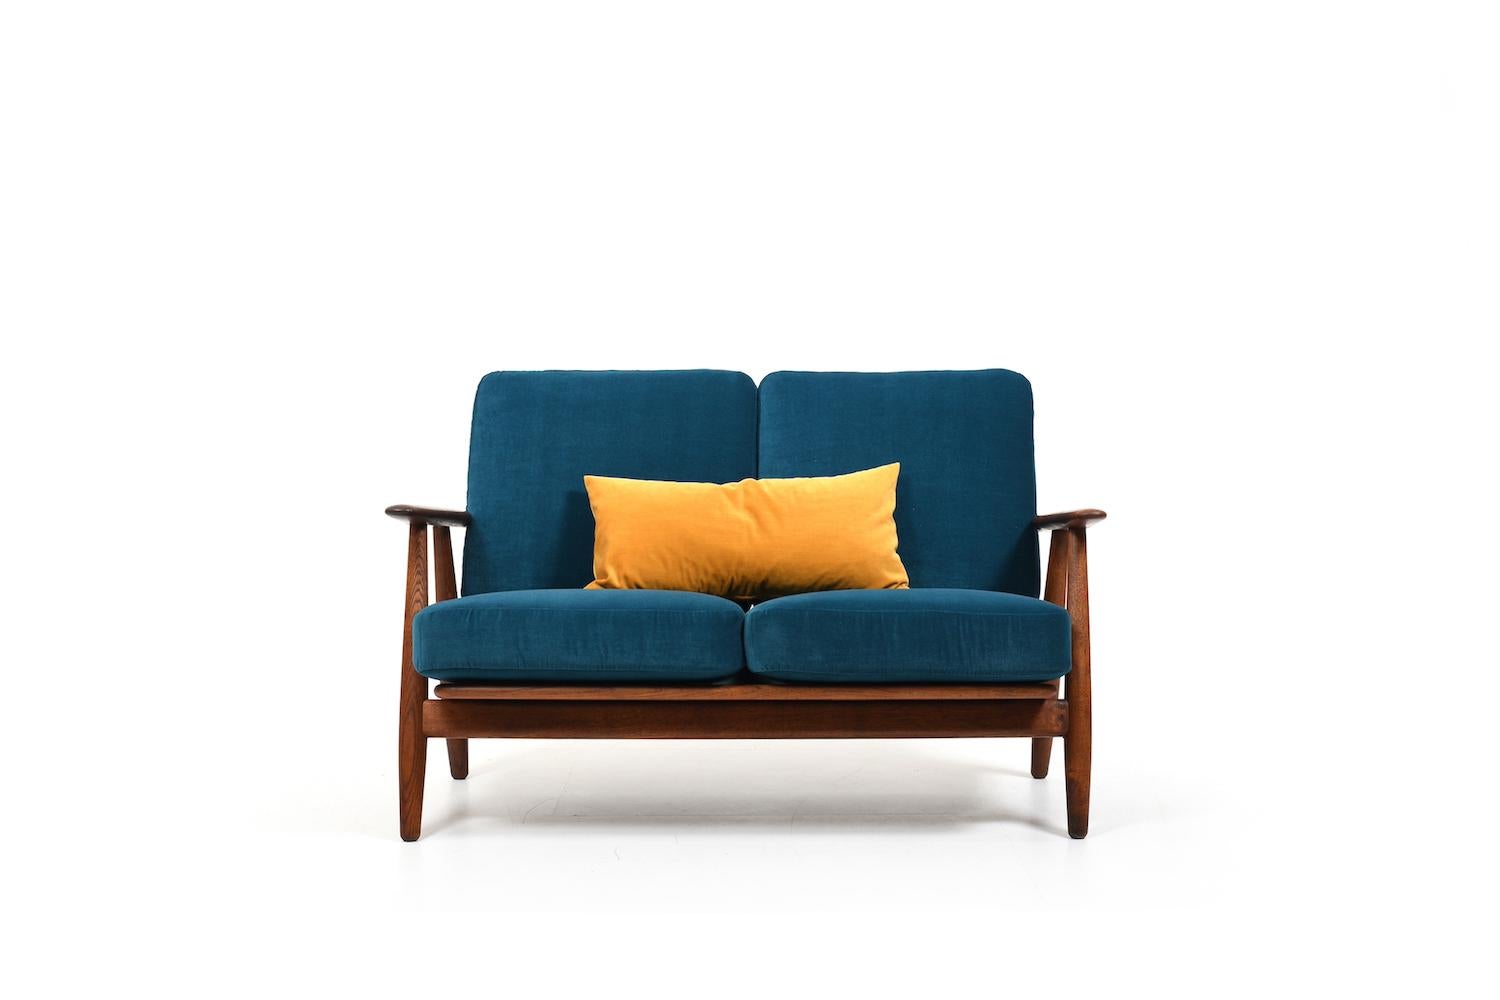 GE-240/ two seater sofa by Hans J. Wegner for Getama Denmark 1950s. Made in solid oak. Wonderful old patina and very good condition. In consideration of their age, the old feathers in the cushions were restored and reupholstered with a petrol color